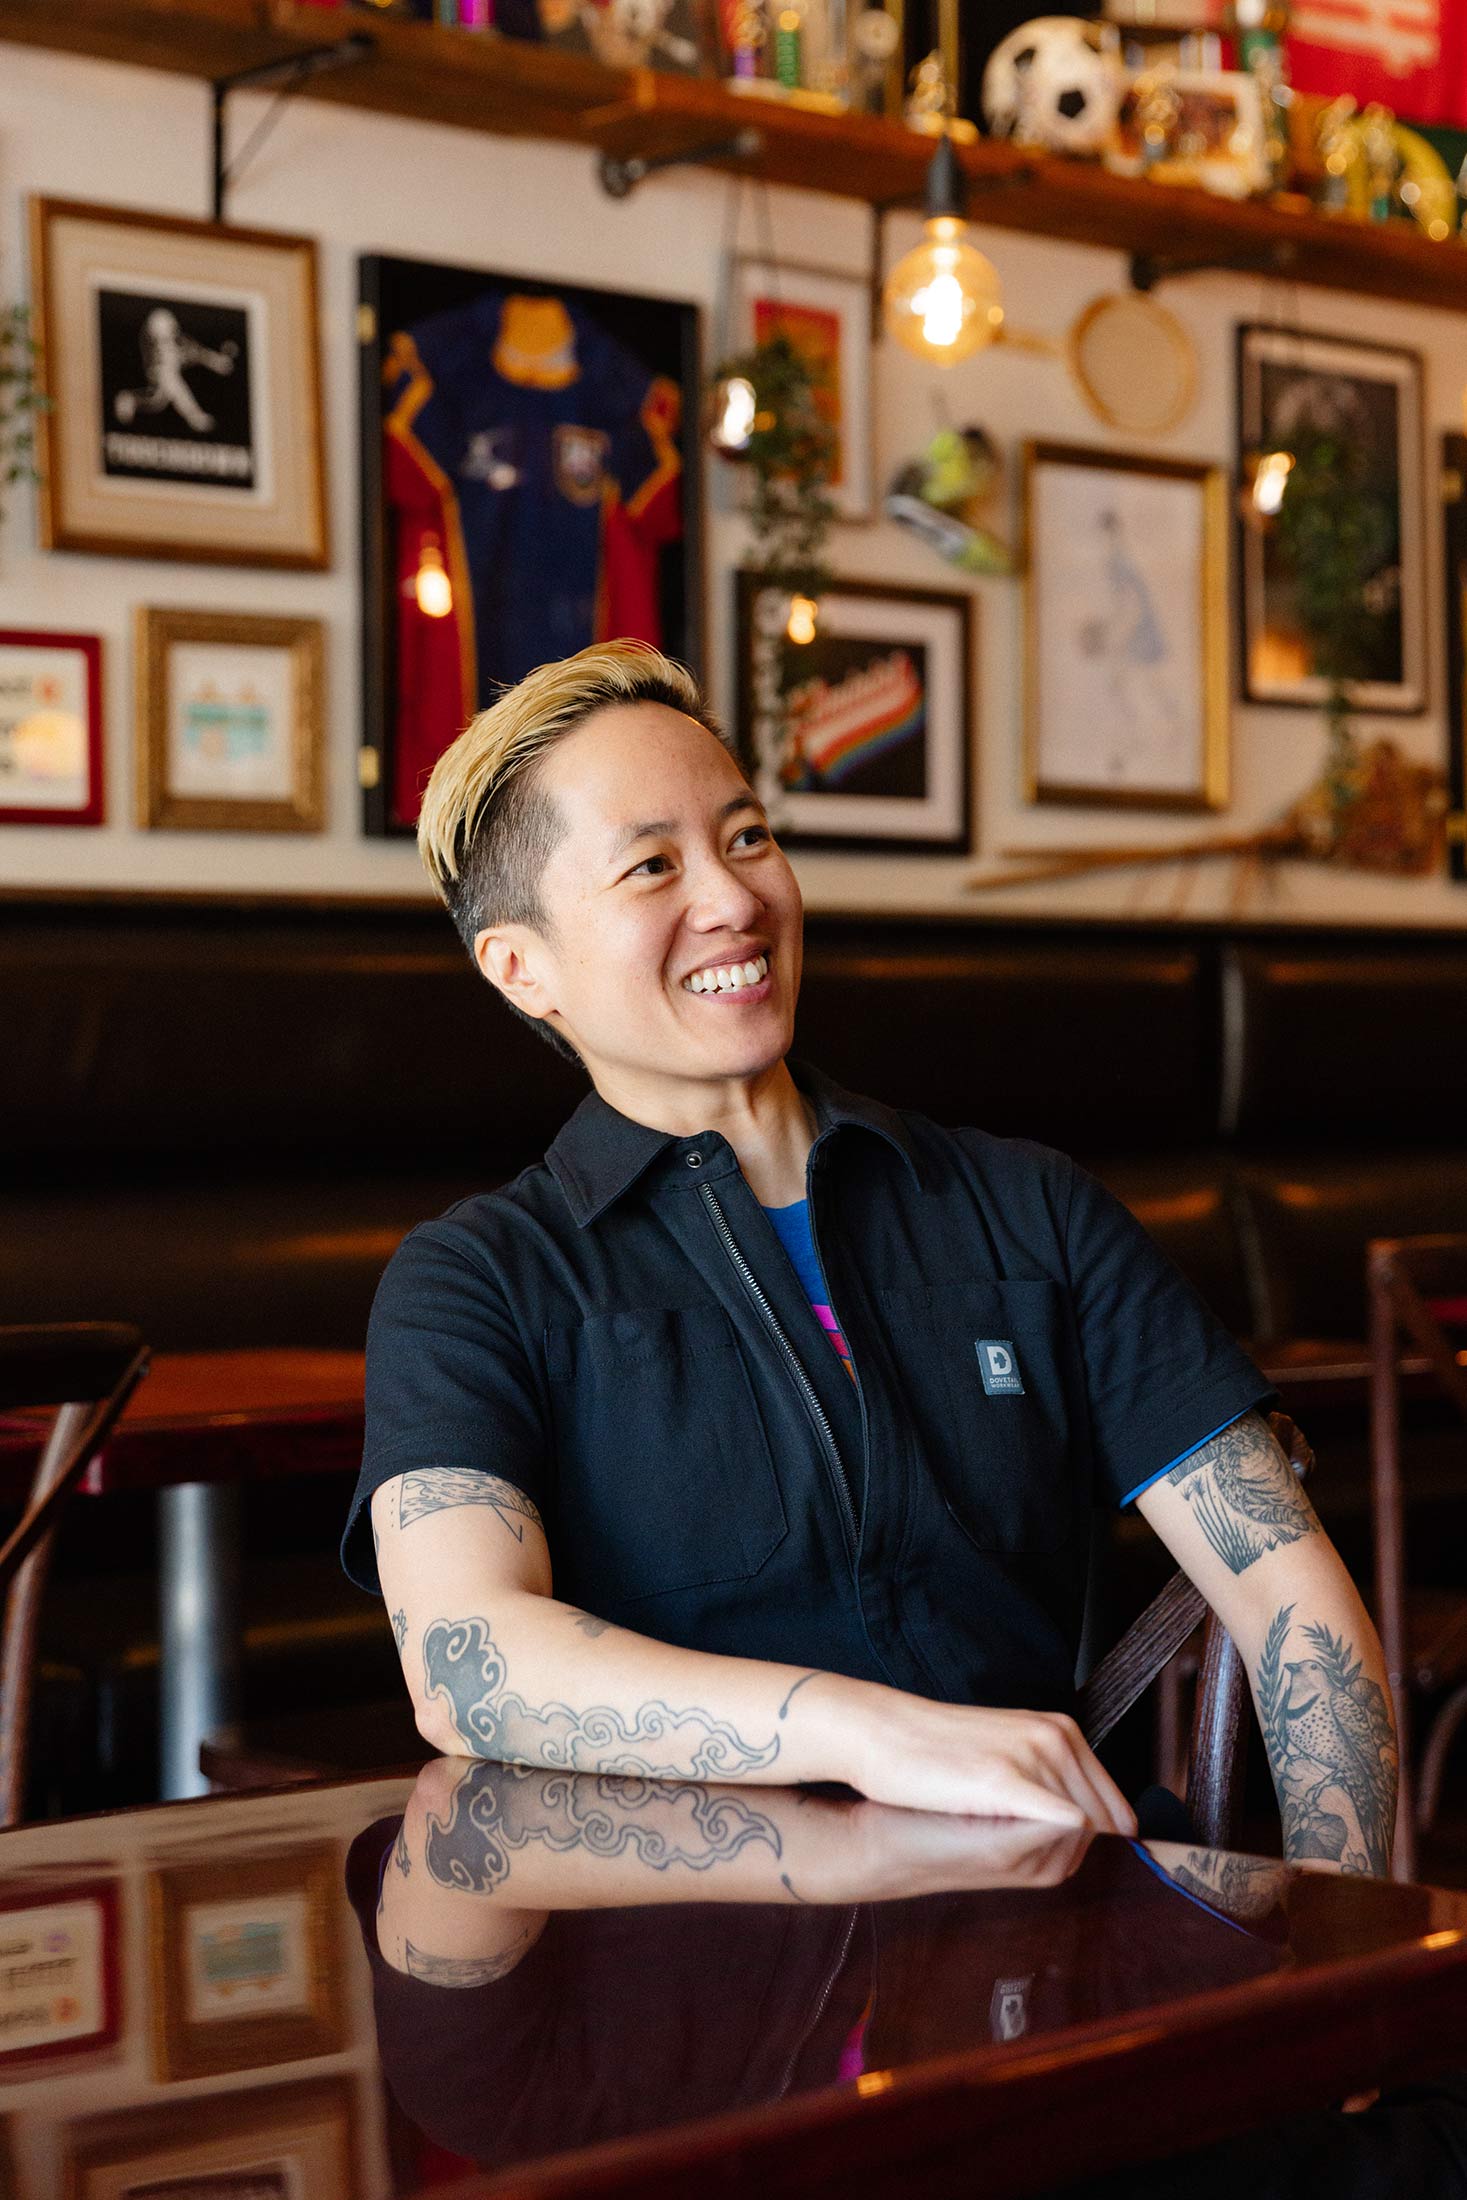 Cheers, drinks and tears: opening day at the bar where women's sports reign, Portland